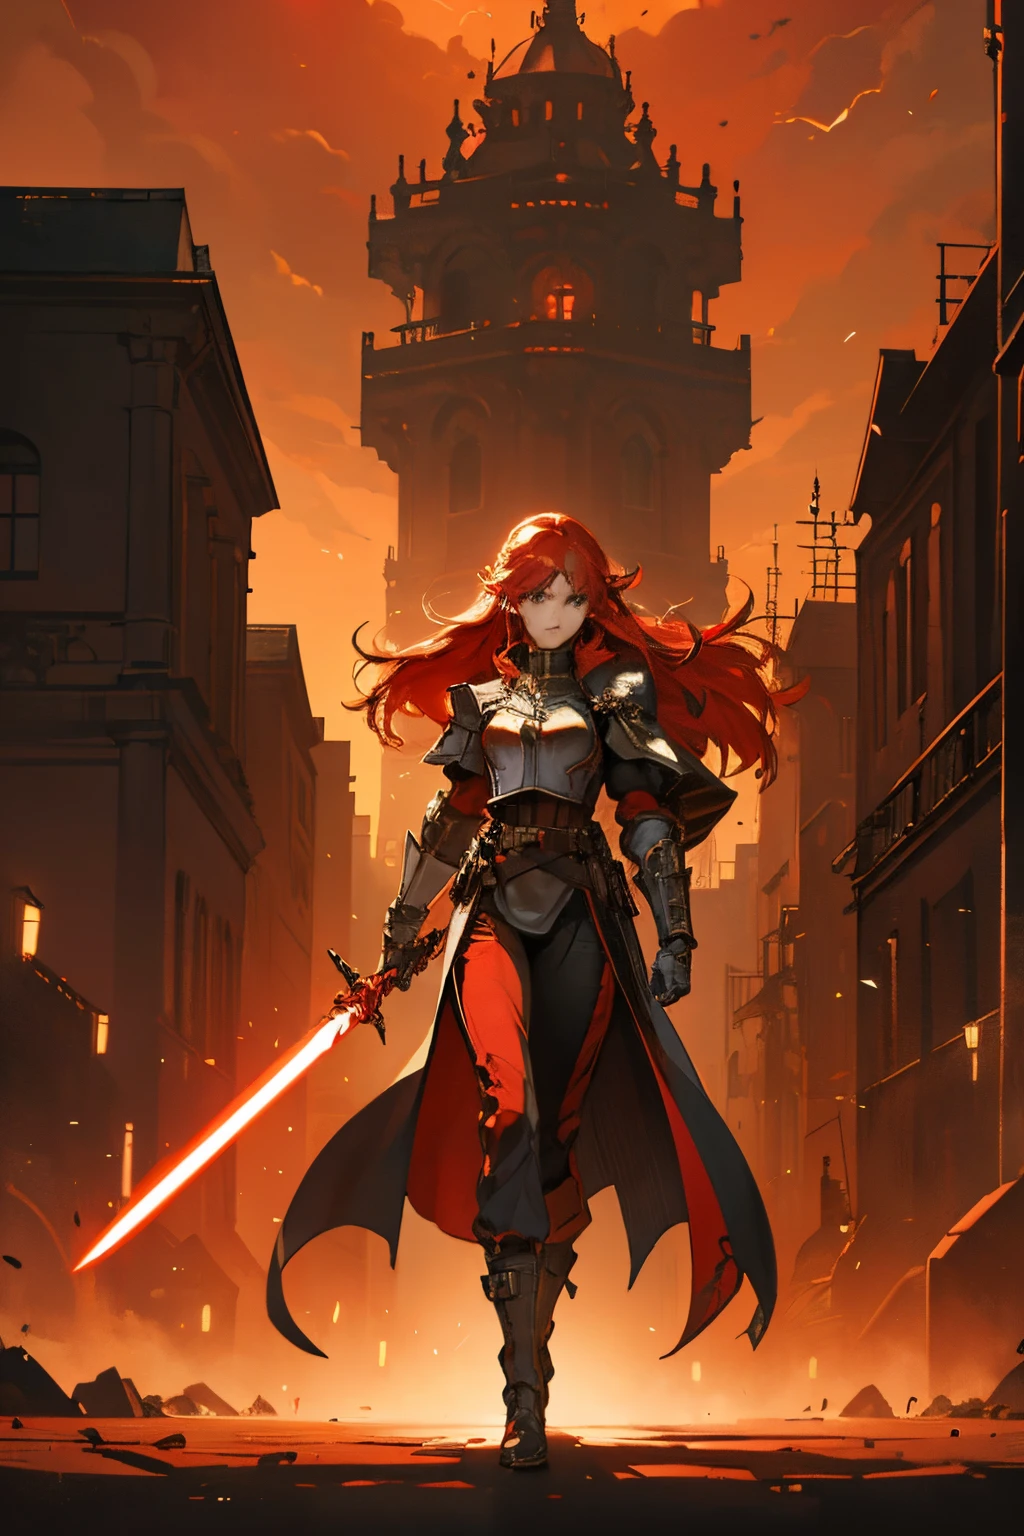 Dark atmosphere, ornament, ornated background, epic movie screenshot wallpaper, red clothes, shimmering shadows, strong colors, candy cotton pastel colors, fullbody of a strong elf woman, reflexive image, red light lightsaber, long hair, loose hair, red voluminous hair, blue eyes, walking through a Medieval city, ornate background with orange and red lights, red armor, tight armor, jedi clothes, tight pants, ink, fantasy00d, monochrome, light_saber, ink, Movie Still, sketch, 1 girl, Holdingsword,fantasy00d,Castlevania Lightning,shinkawa youji